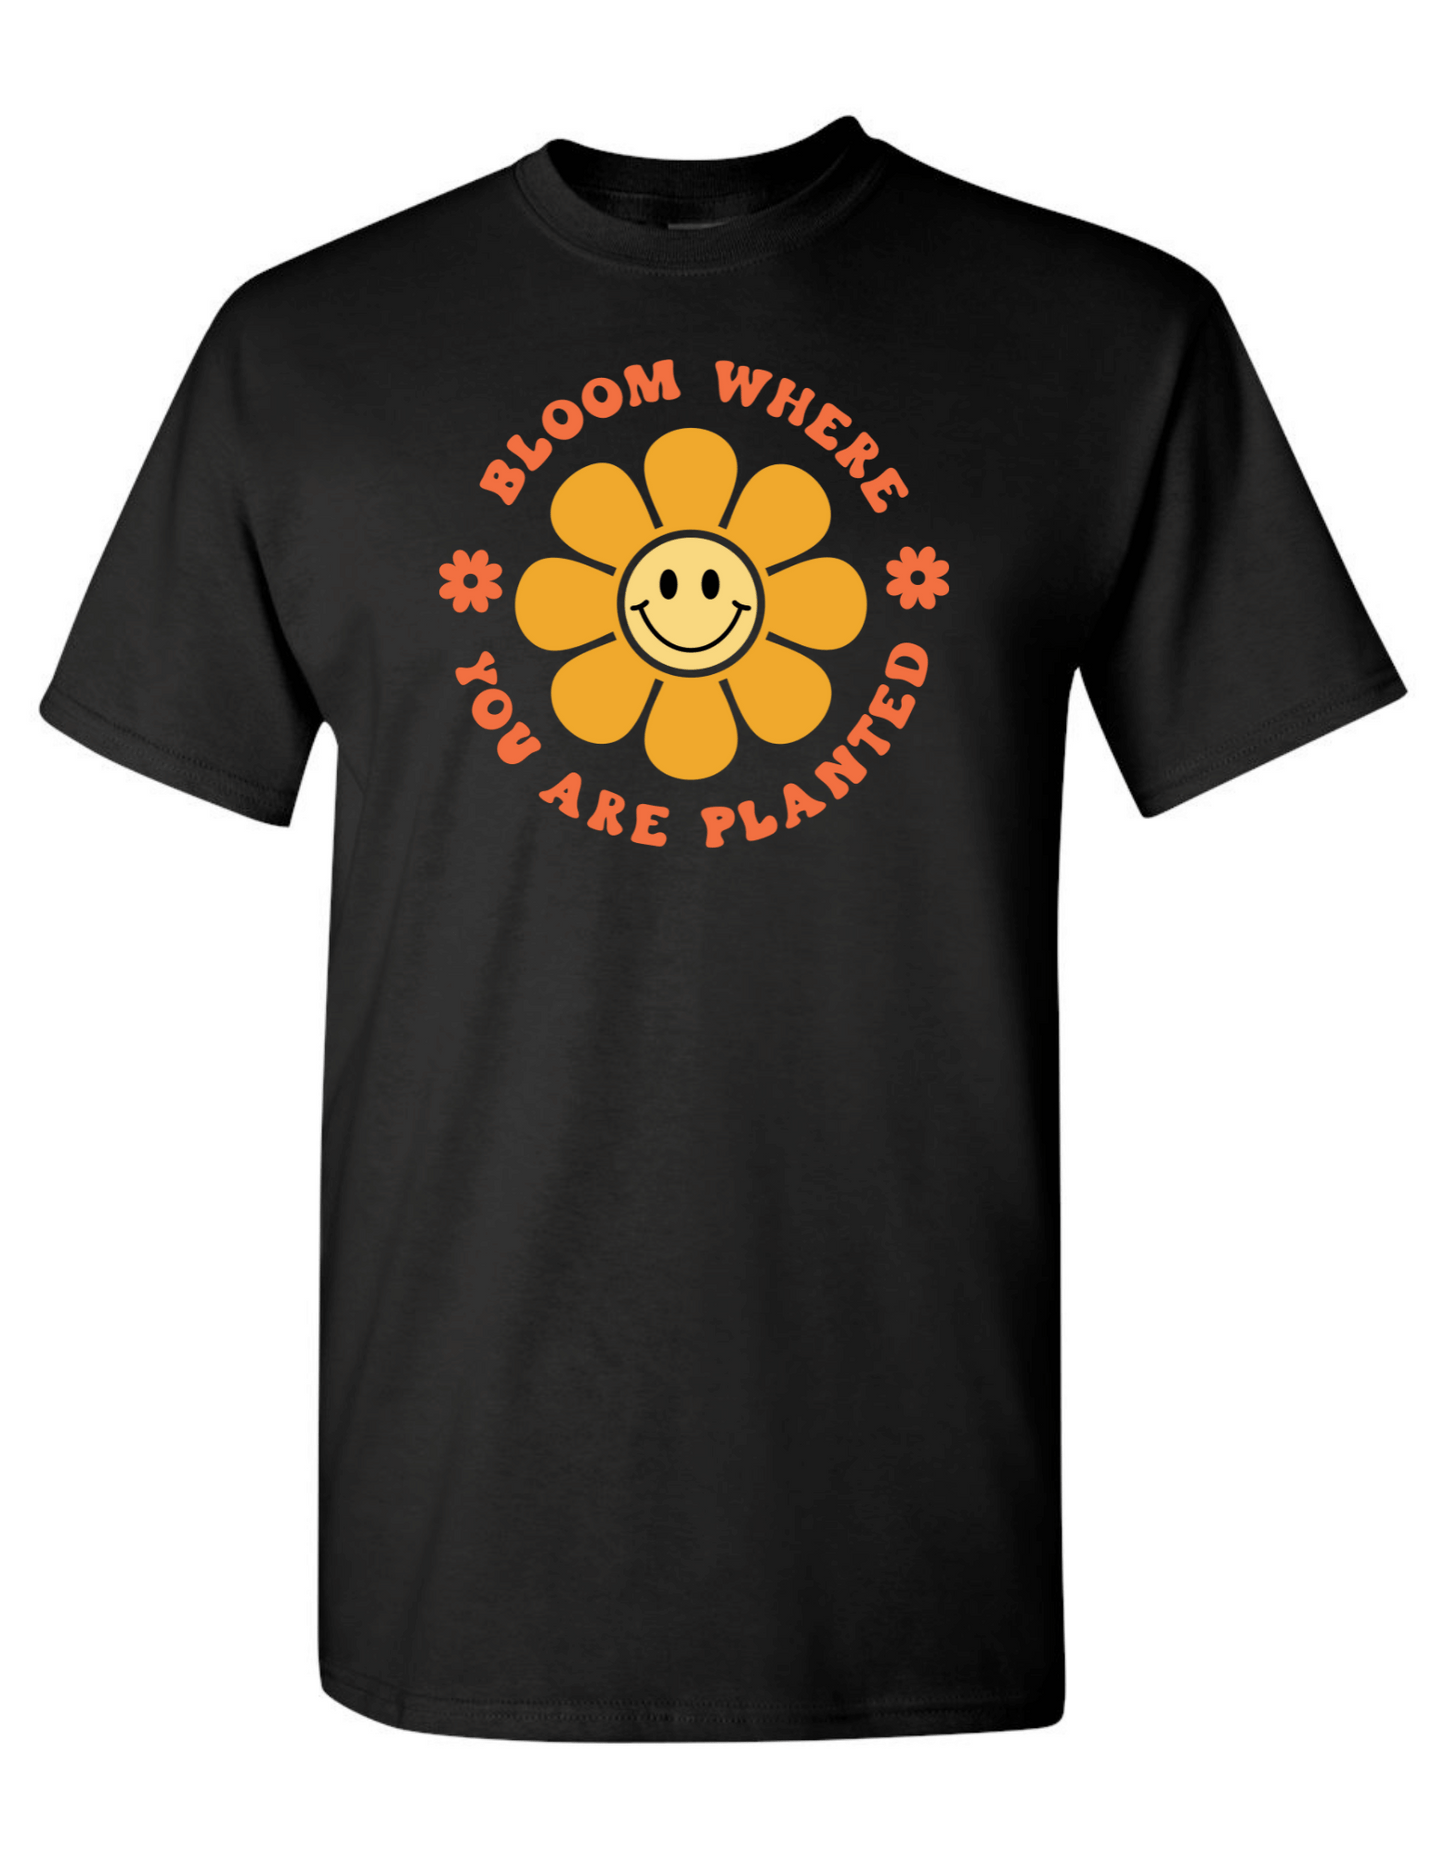 Made to Order Handmade Bloom Where You Are Planted Inspirational Short Sleeve Shirt